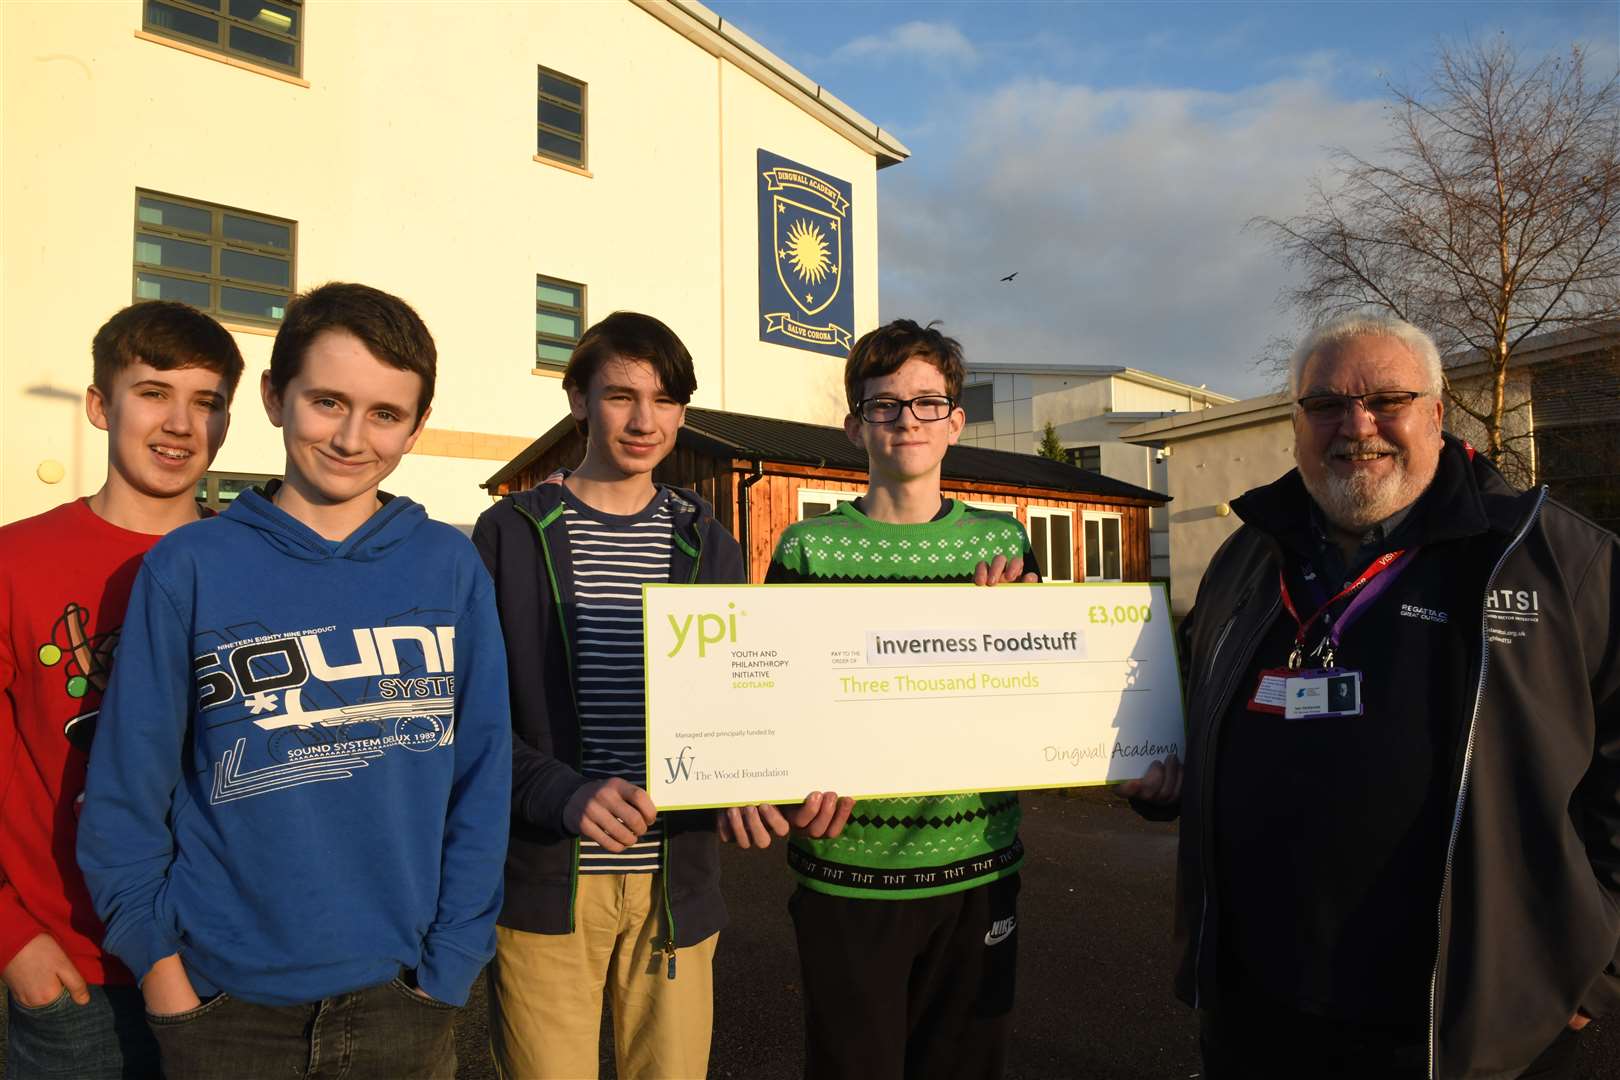 Dingwall Academy S3 pupils Harry Stewart, Seth Hitchen, Magnus Atkinson and Angus Porter hand over the donation to Iain McKenzie, vice chairman of Inverness Foodstuff. Picture: James Mackenzie.